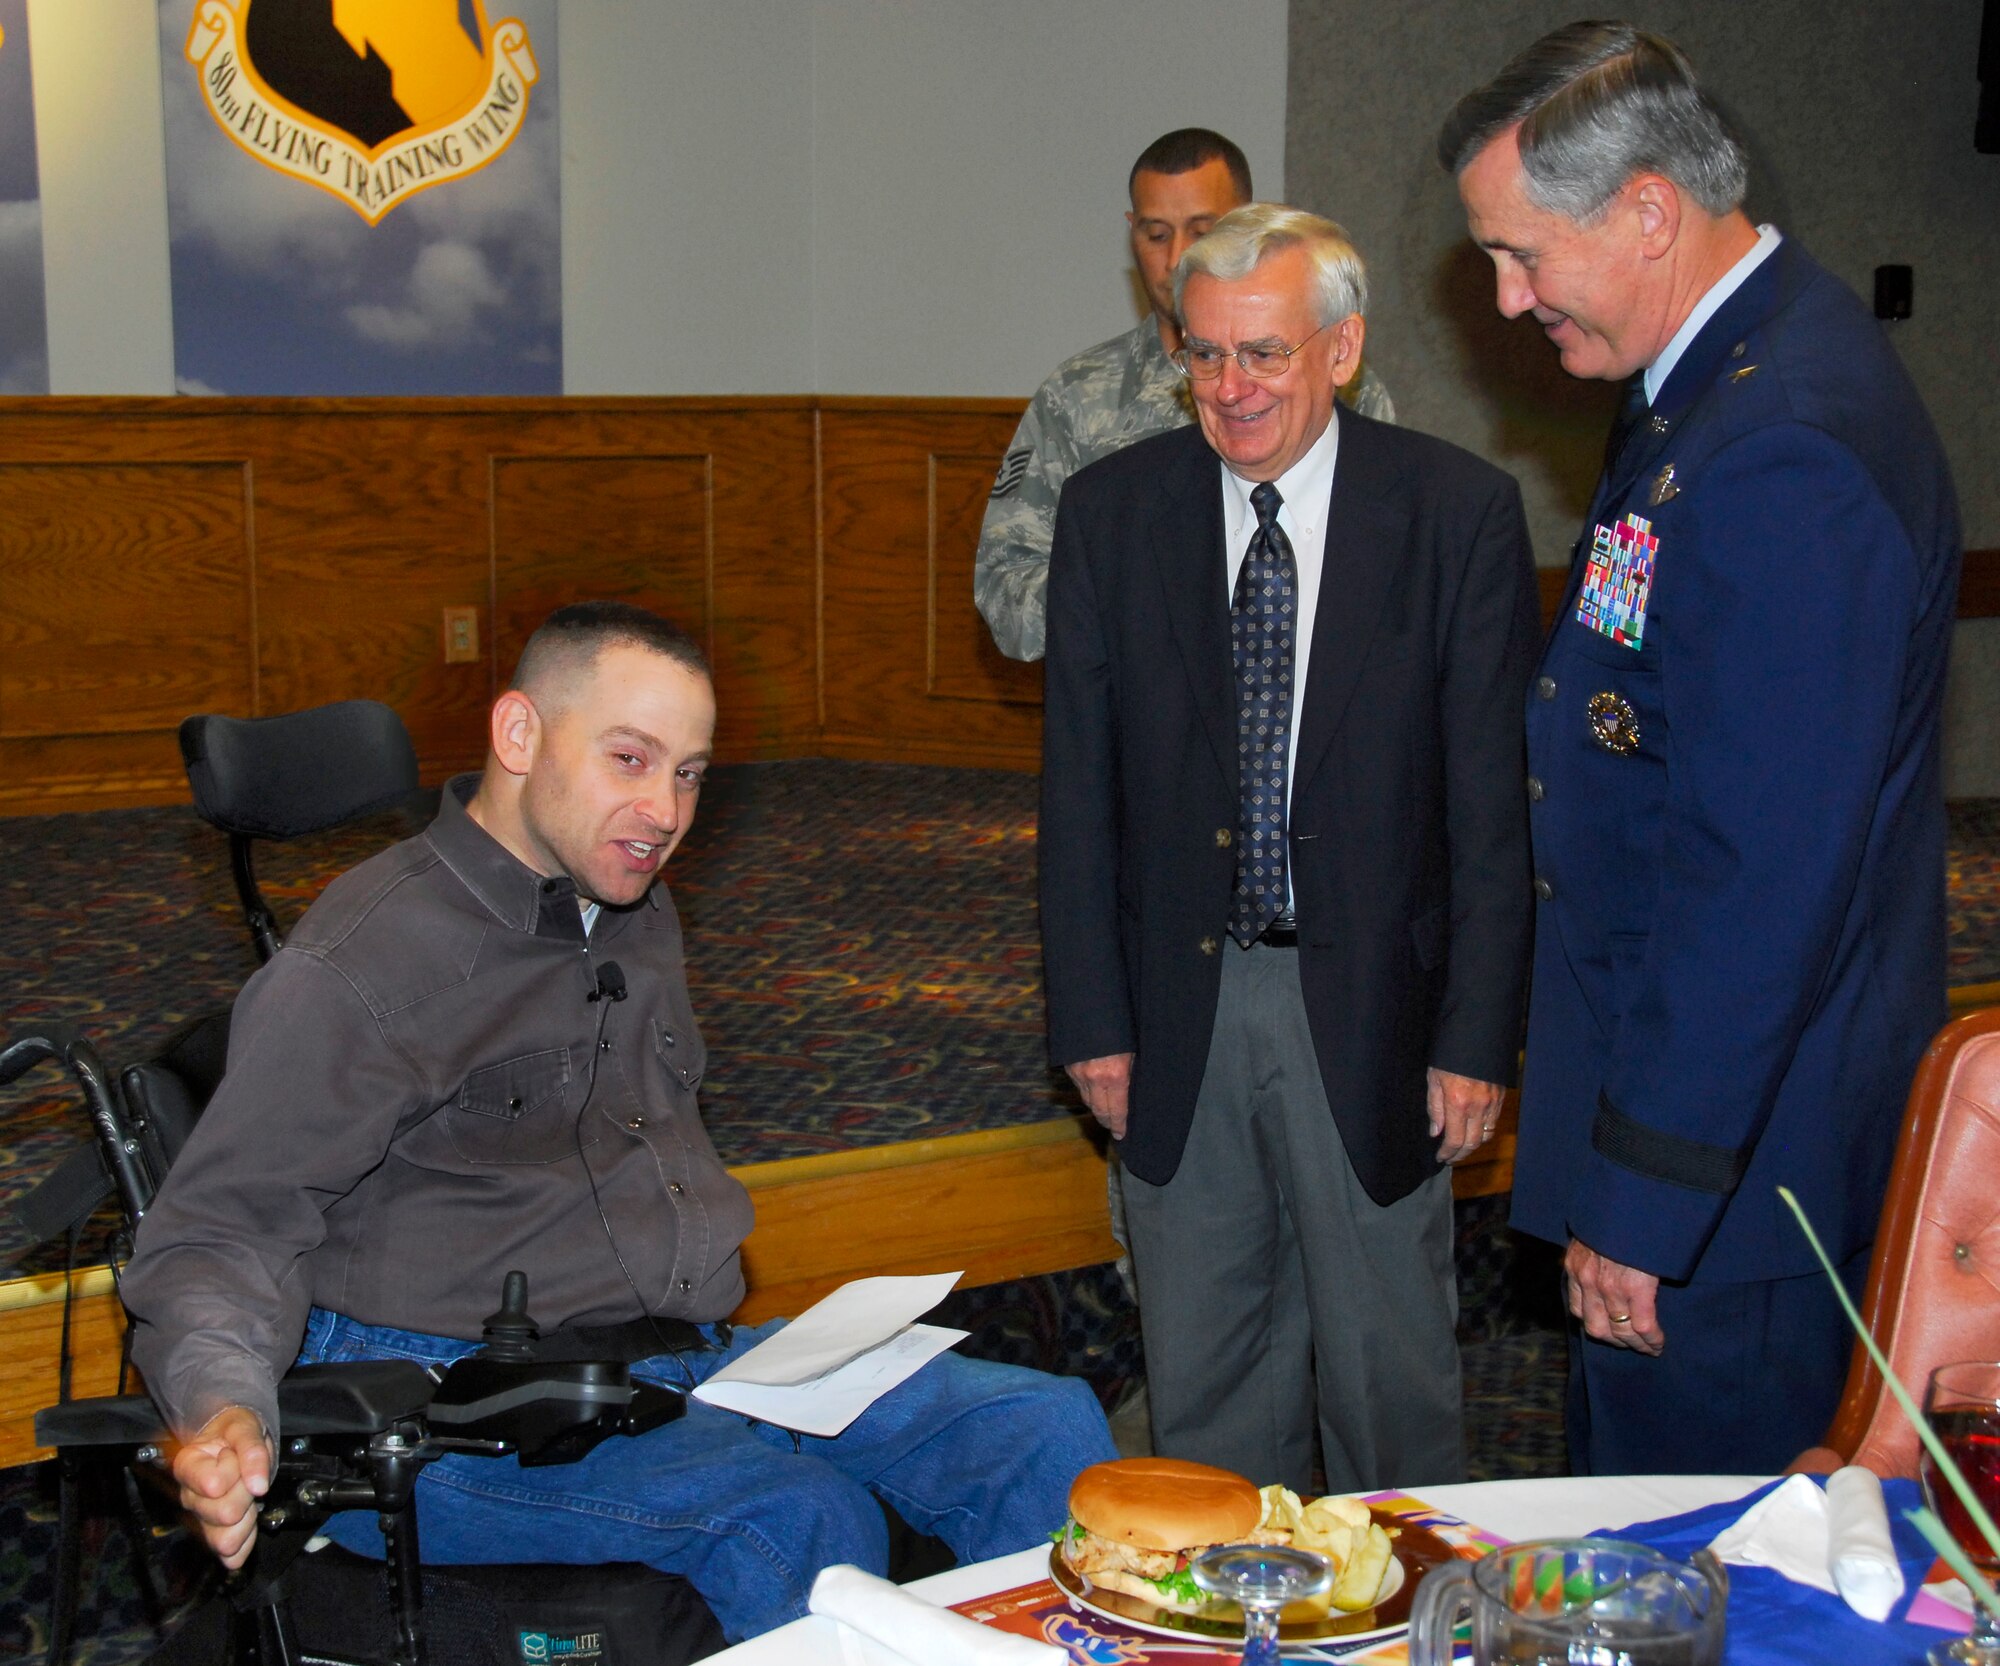 Mark Schroeder, a guest speaker with the 82nd Communications Squadron, is greeted by the mayor of Burkburnett Carl Law  and 82nd Training Wing commander O. G. Mannon before the annual National Disability Employment Awareness luncheon Oct. 23. (U.S. Air Force photo/Harry Tonemah) 